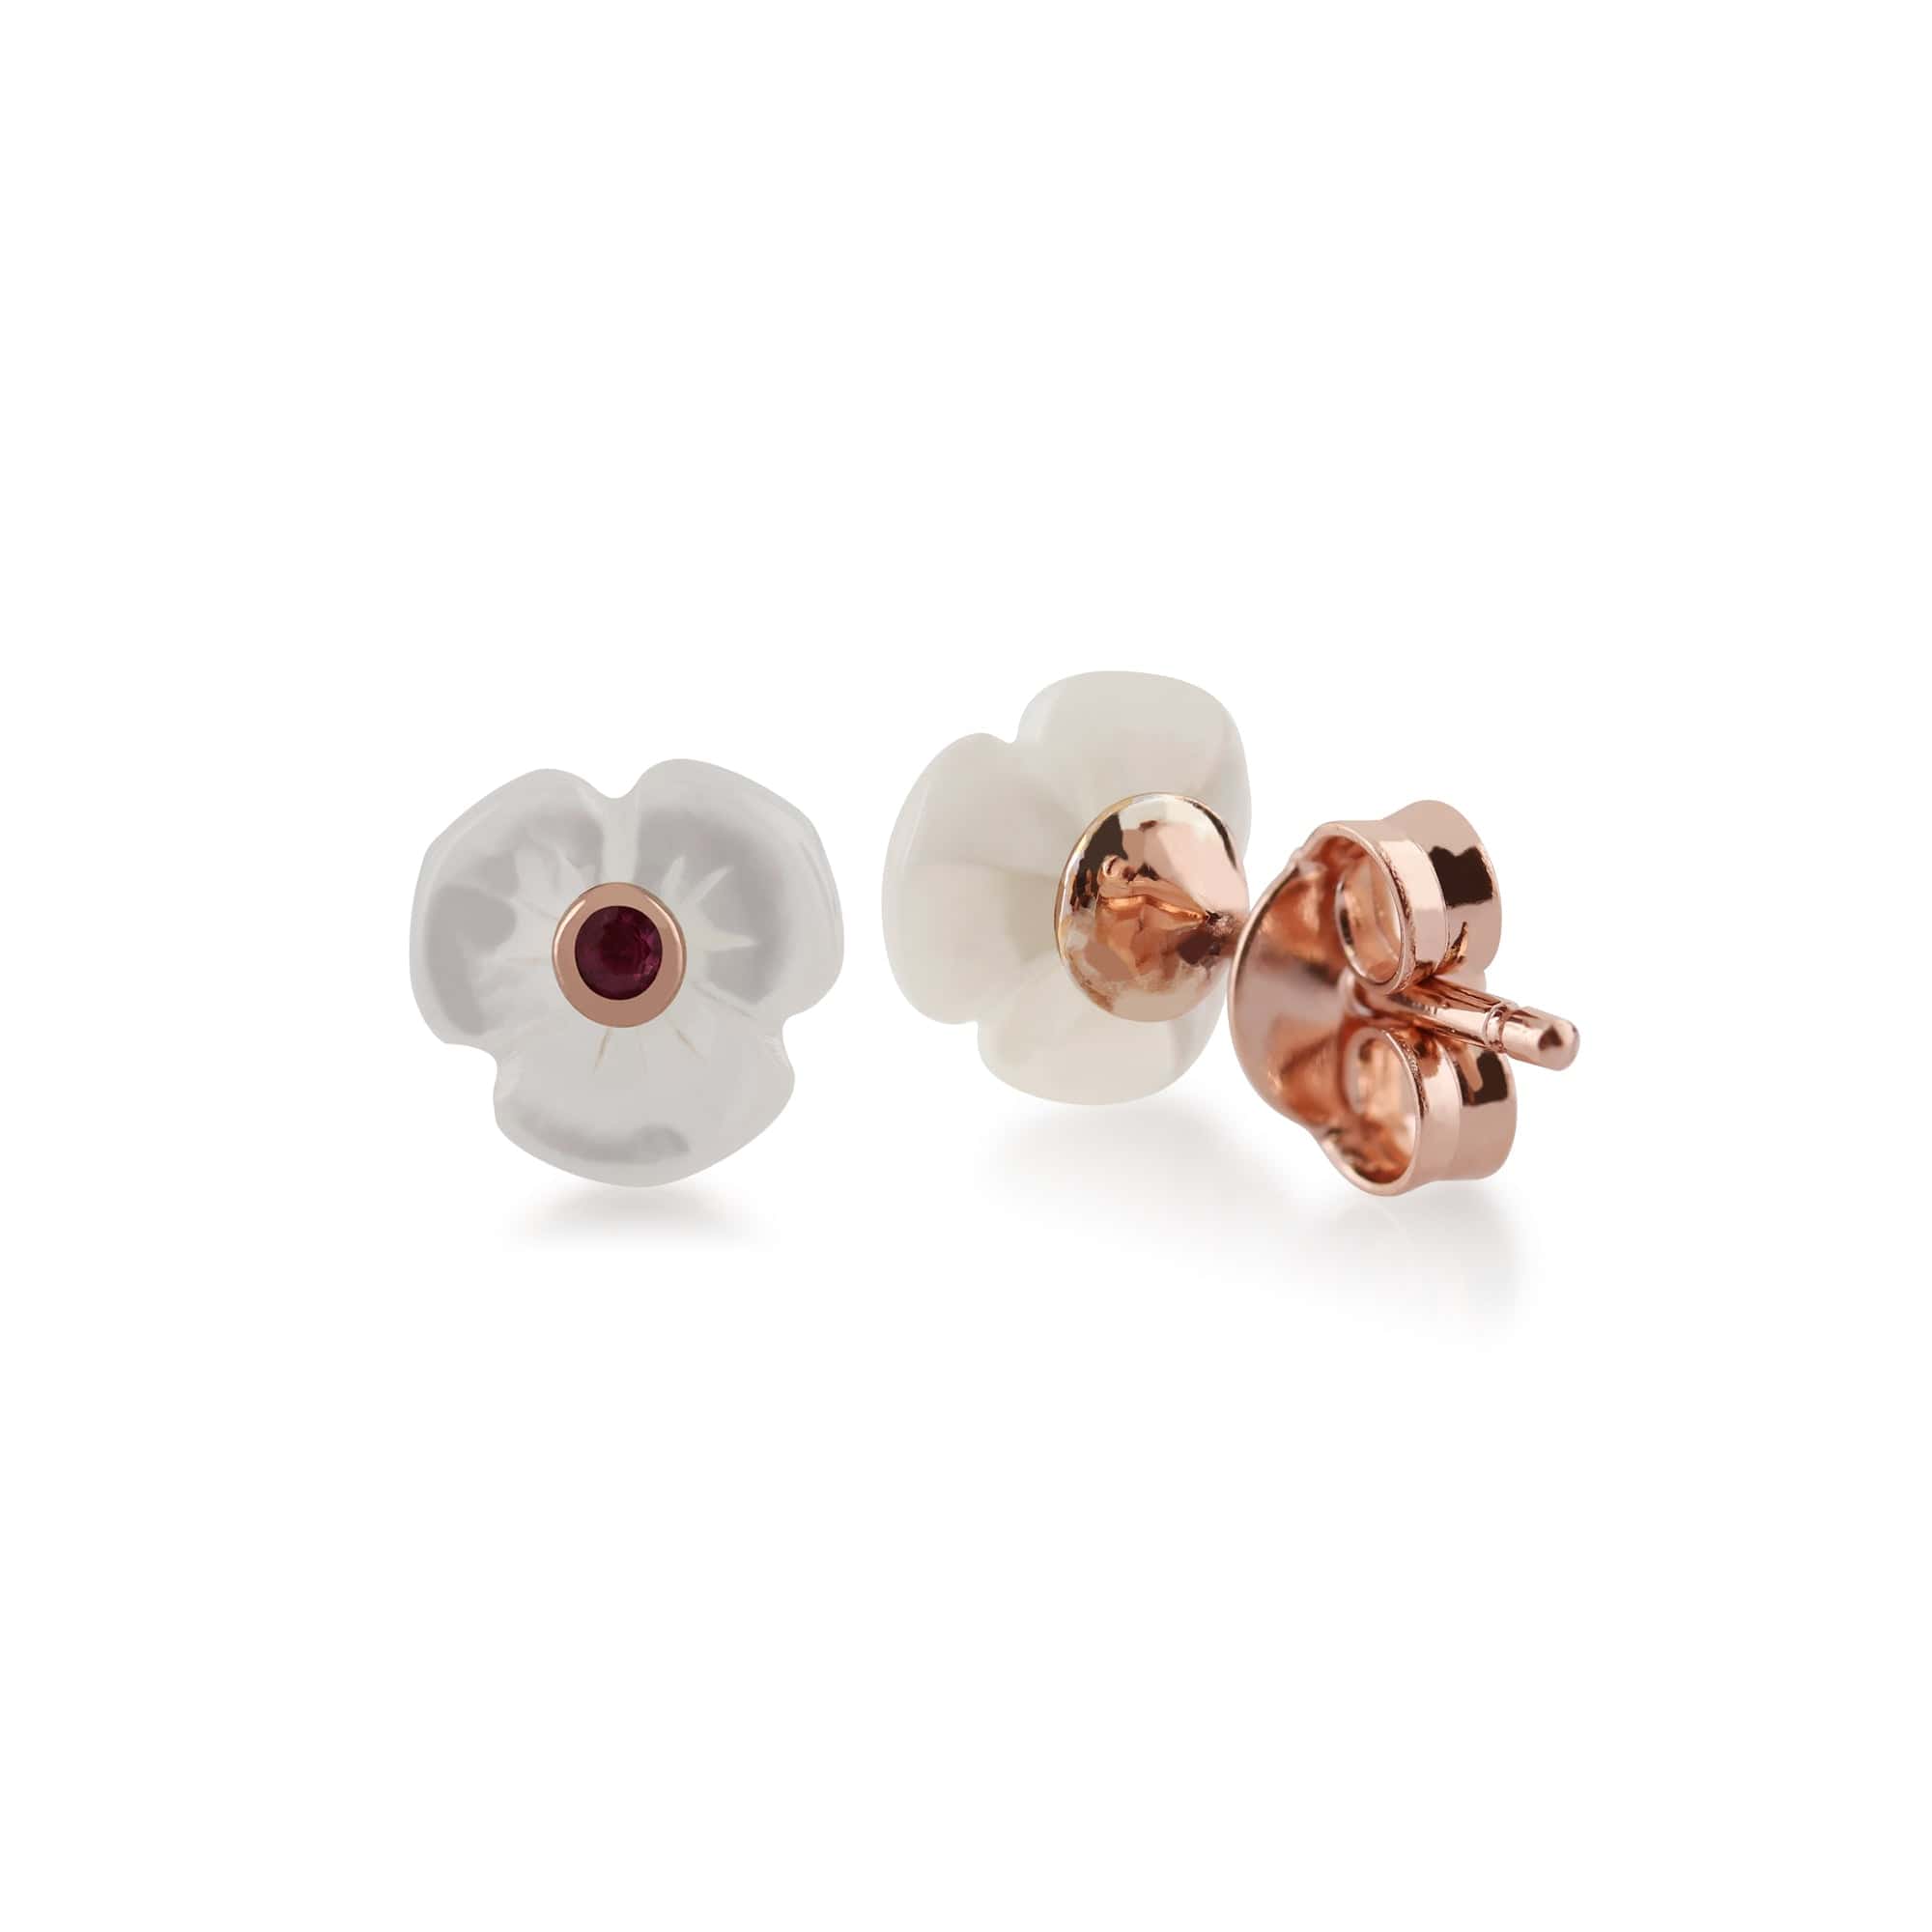 253E224101925 Floral Mother of Pearl & Round Ruby Poppy Stud Earrings in Rose Gold Plated 925 Sterling Silver 2